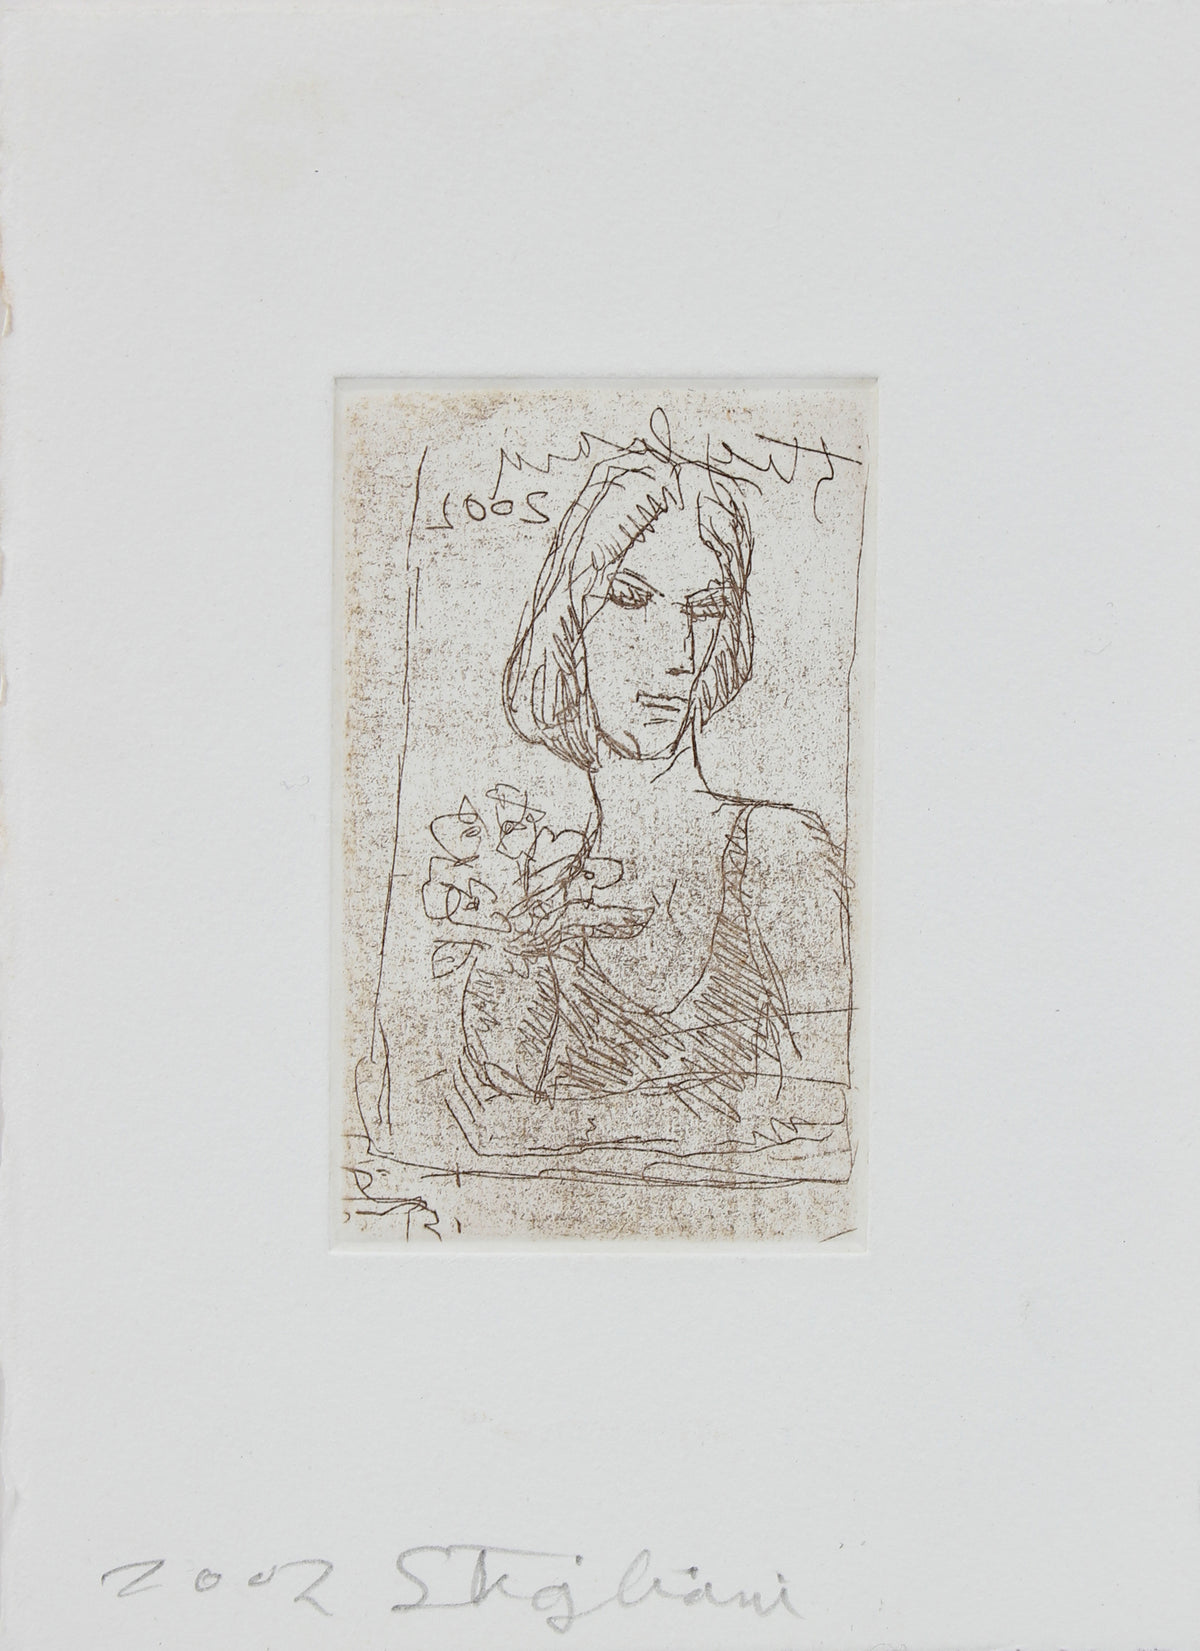 Woman with Flowers&lt;br&gt;2002 Etching&lt;br&gt;&lt;br&gt;#95113